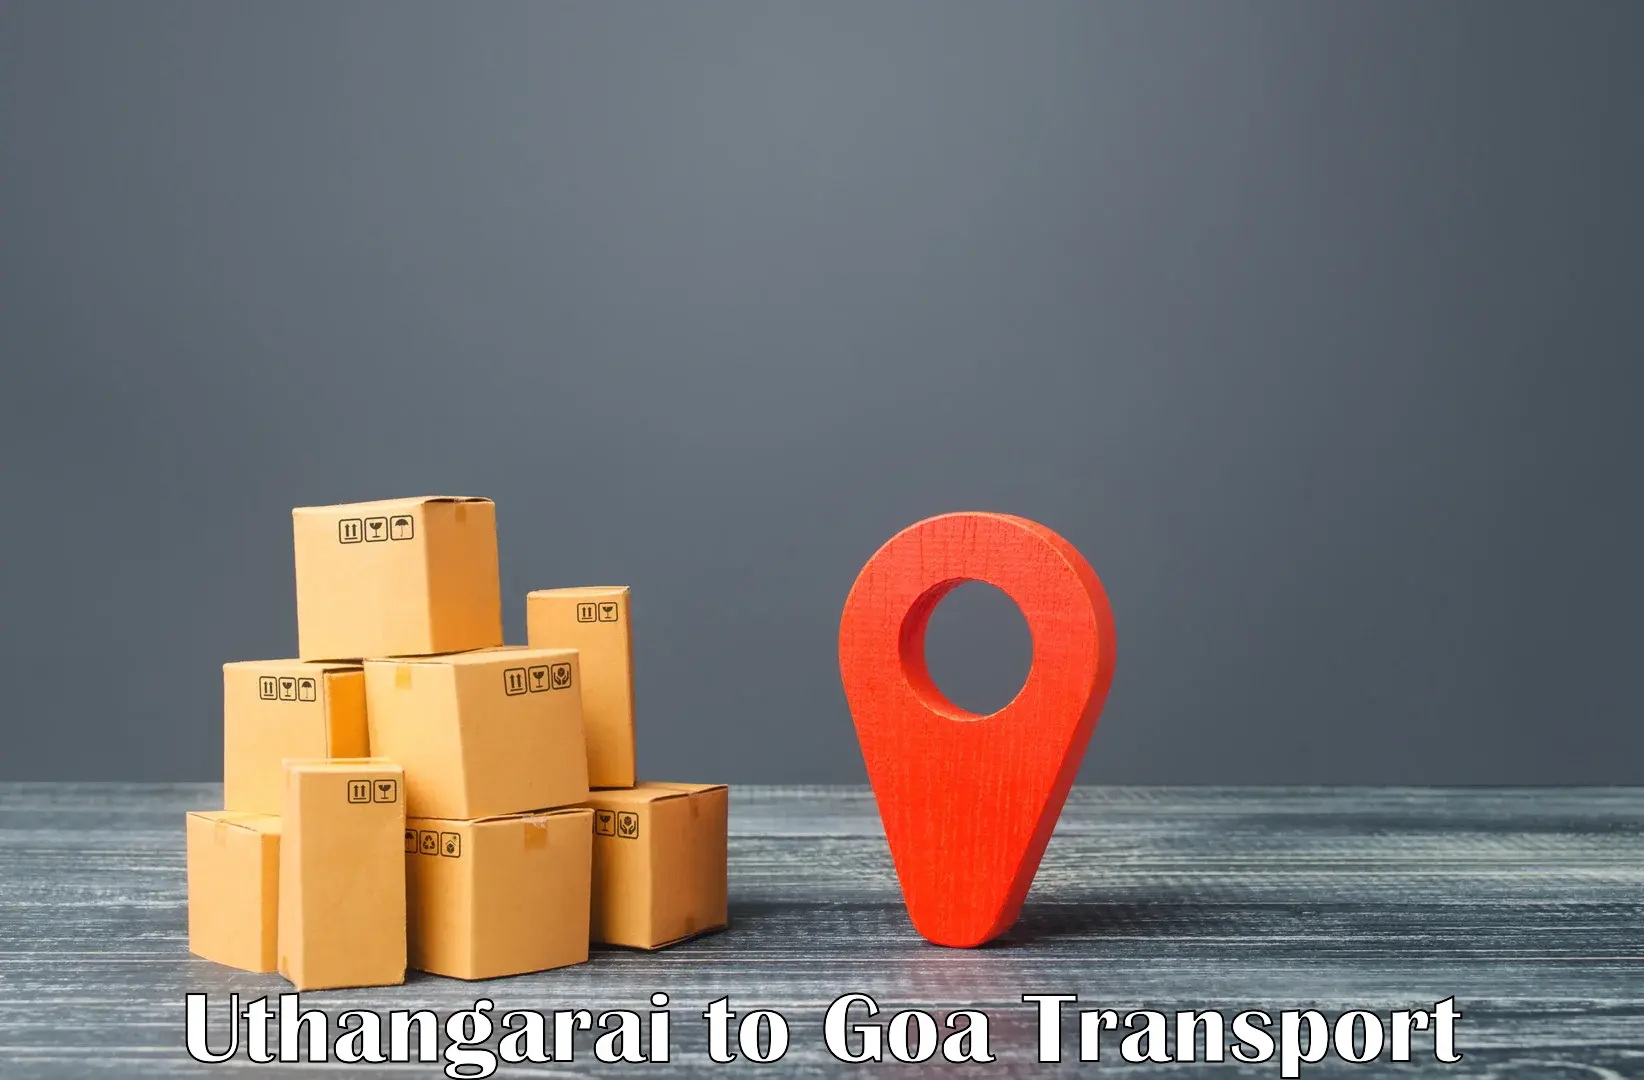 Transport bike from one state to another Uthangarai to Goa